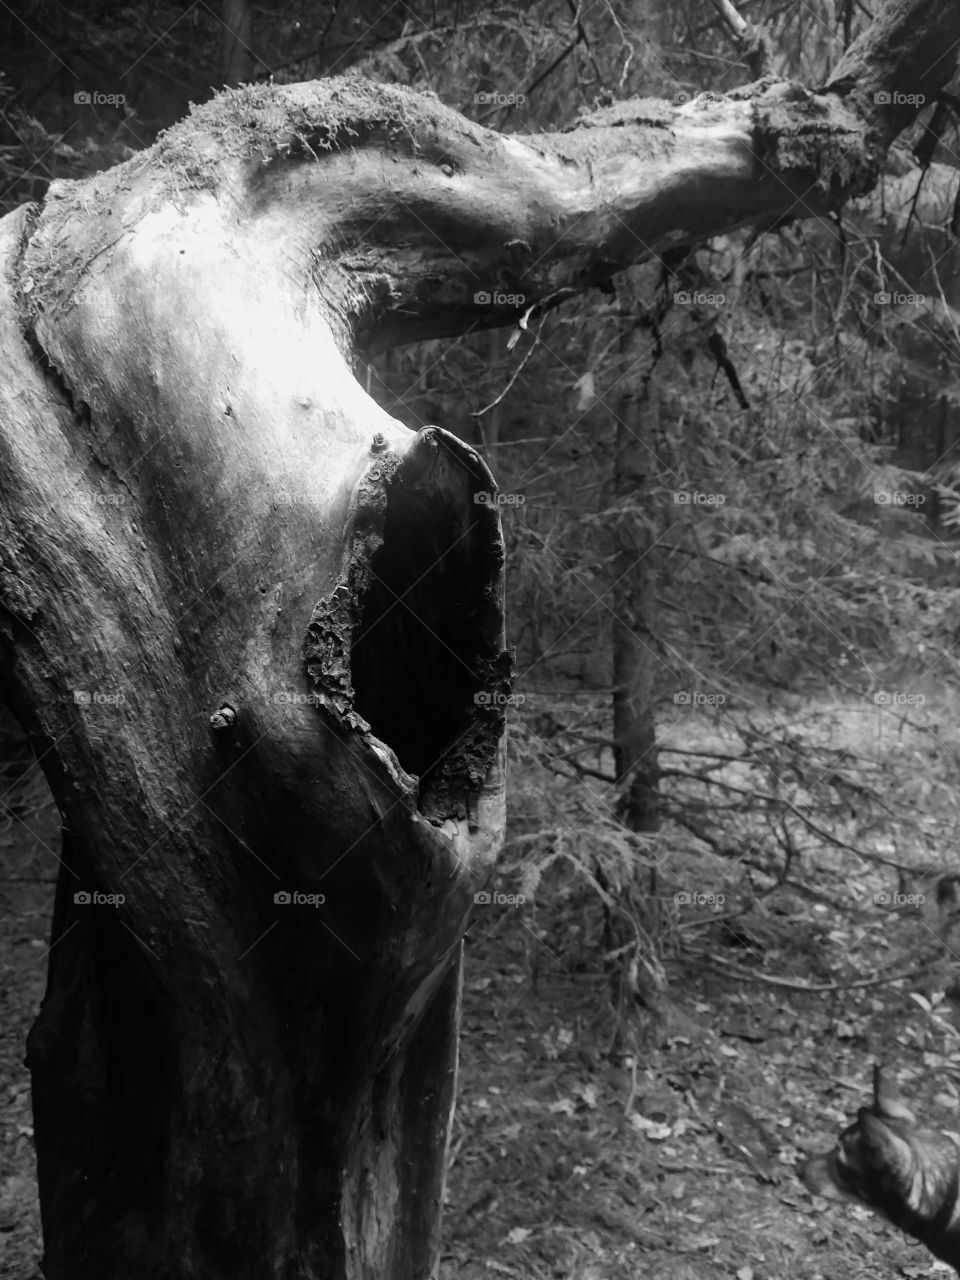 Dead tree looks so mysterious in black and white